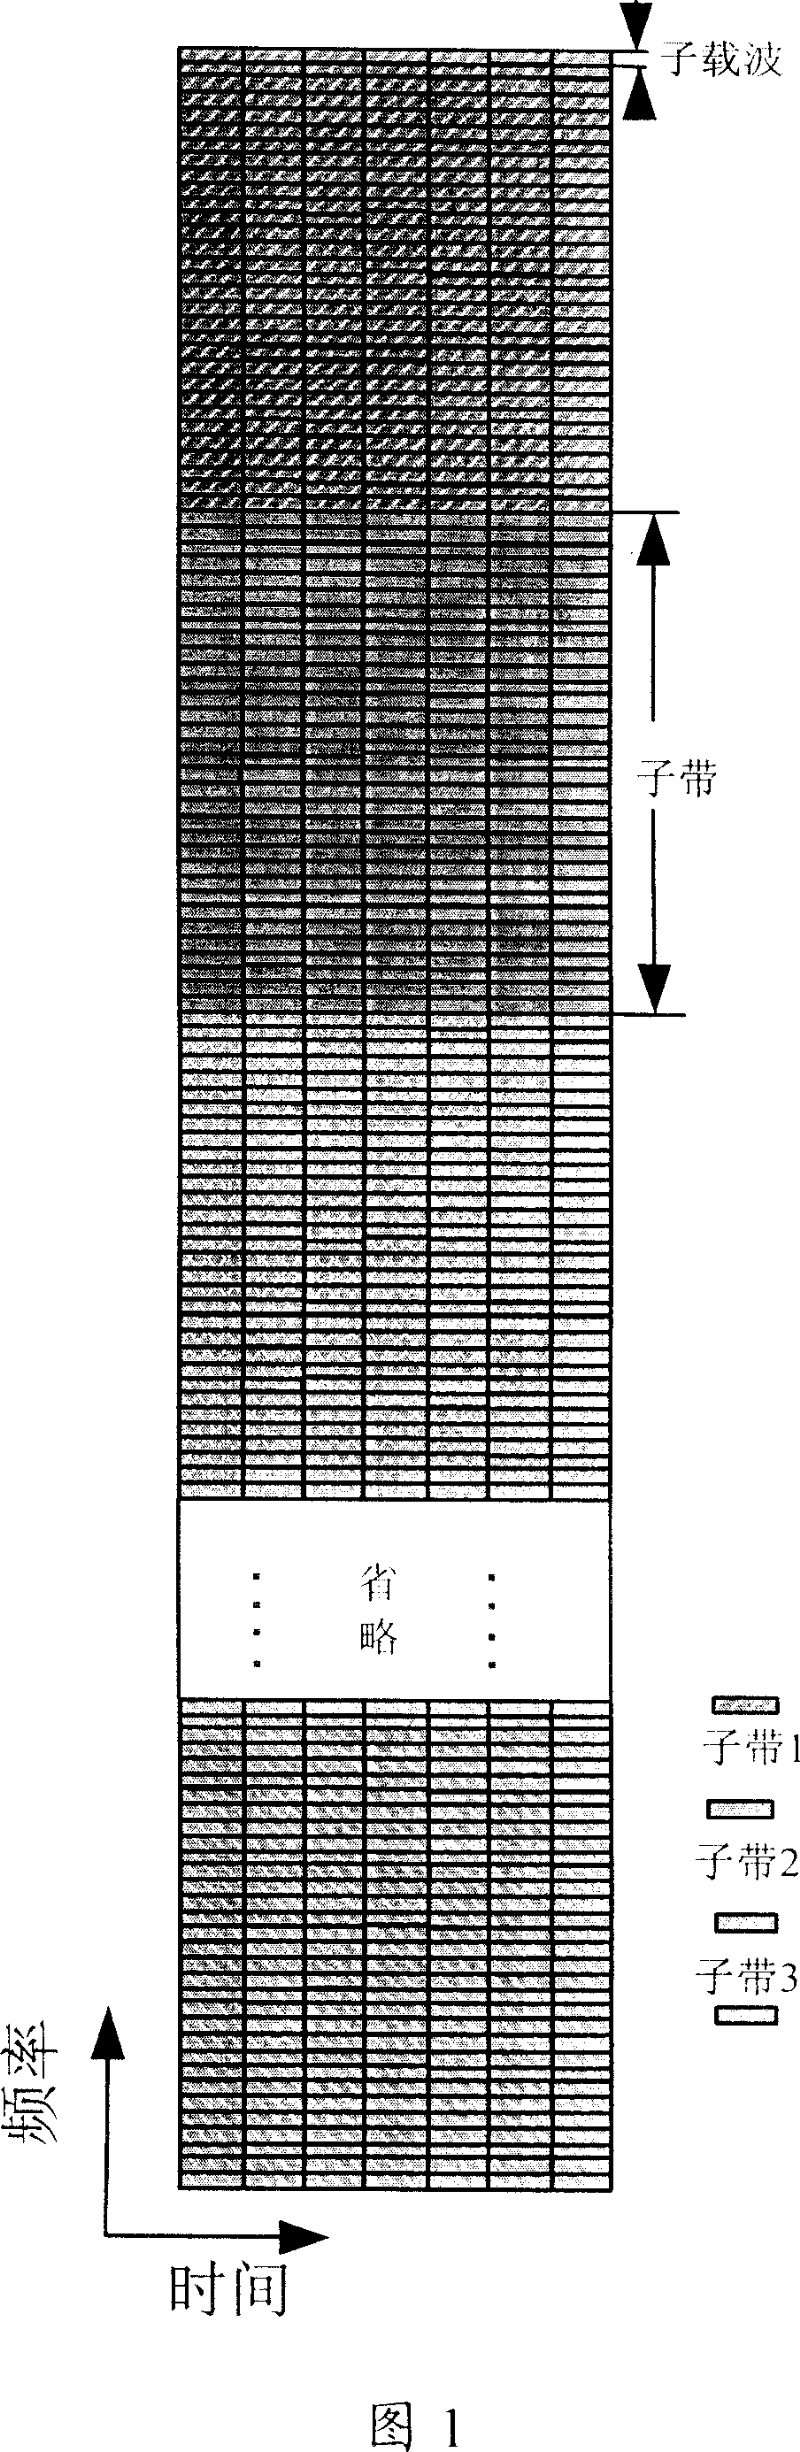 Method and apparatus for distributing OFDM physical channel resources